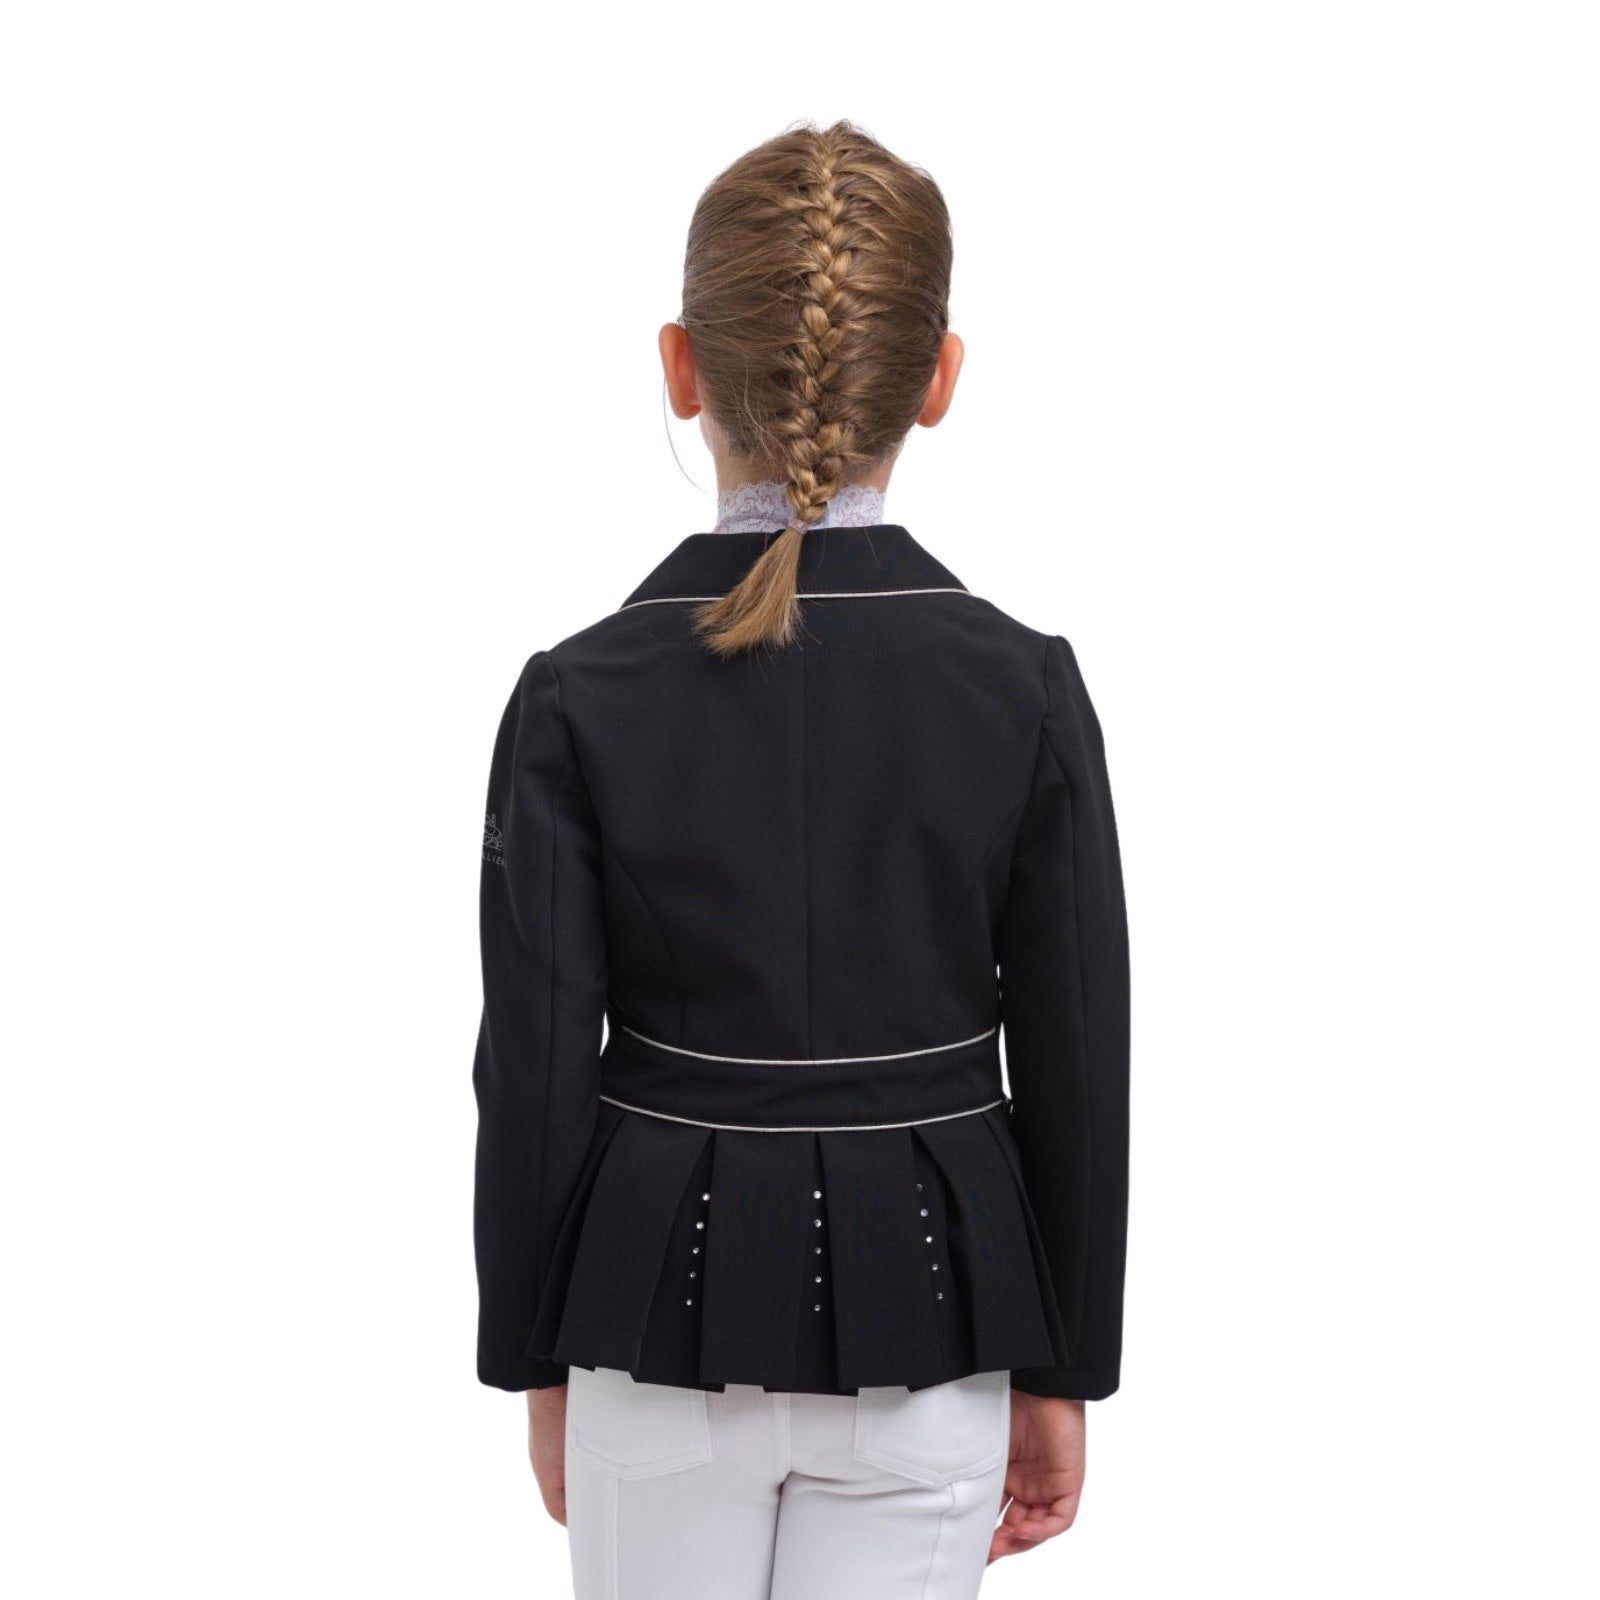 Equinavia Cavalliera Rose Gold Purity Show Jacket